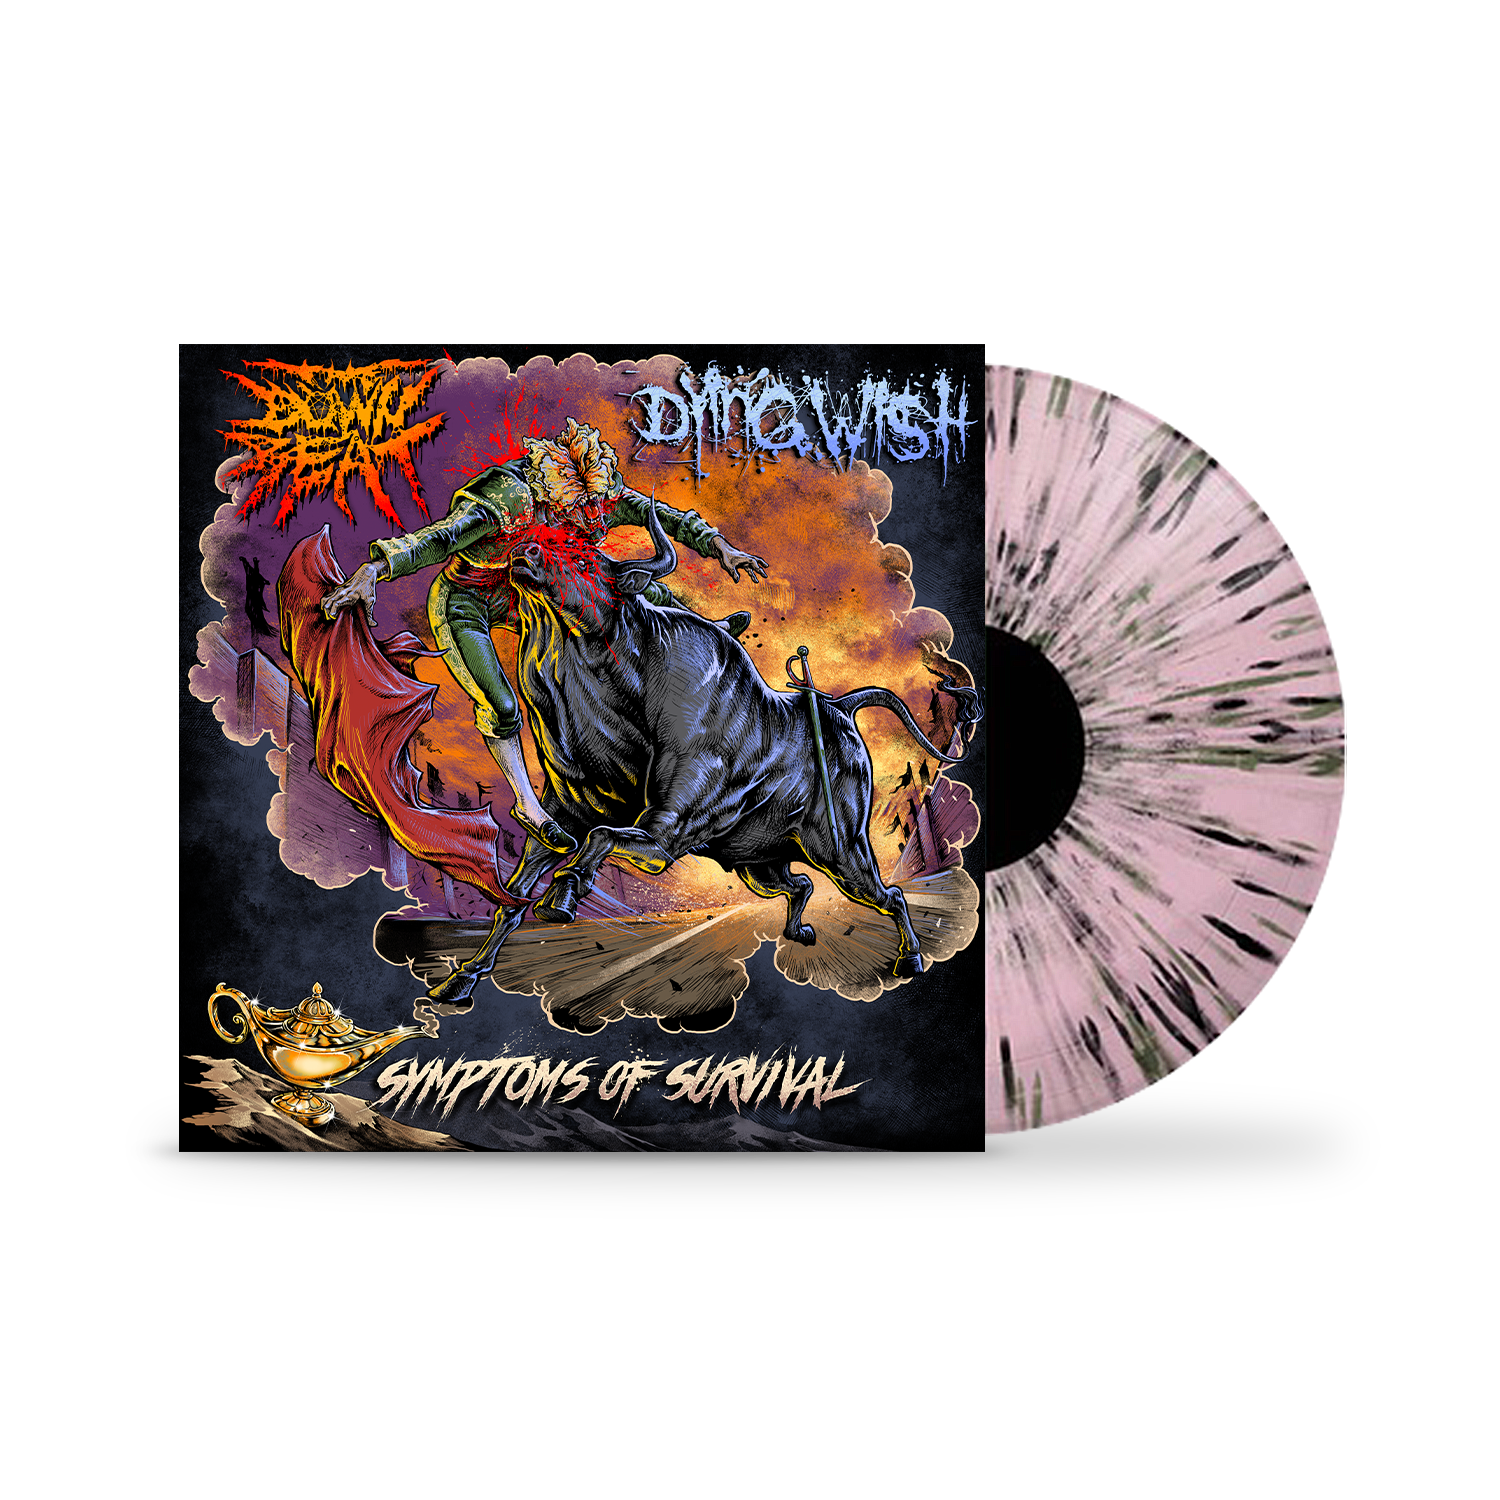 Symptoms of Survival 12" Vinyl - Downbeat X Dying Wish Collab - Limited to 500 Copies